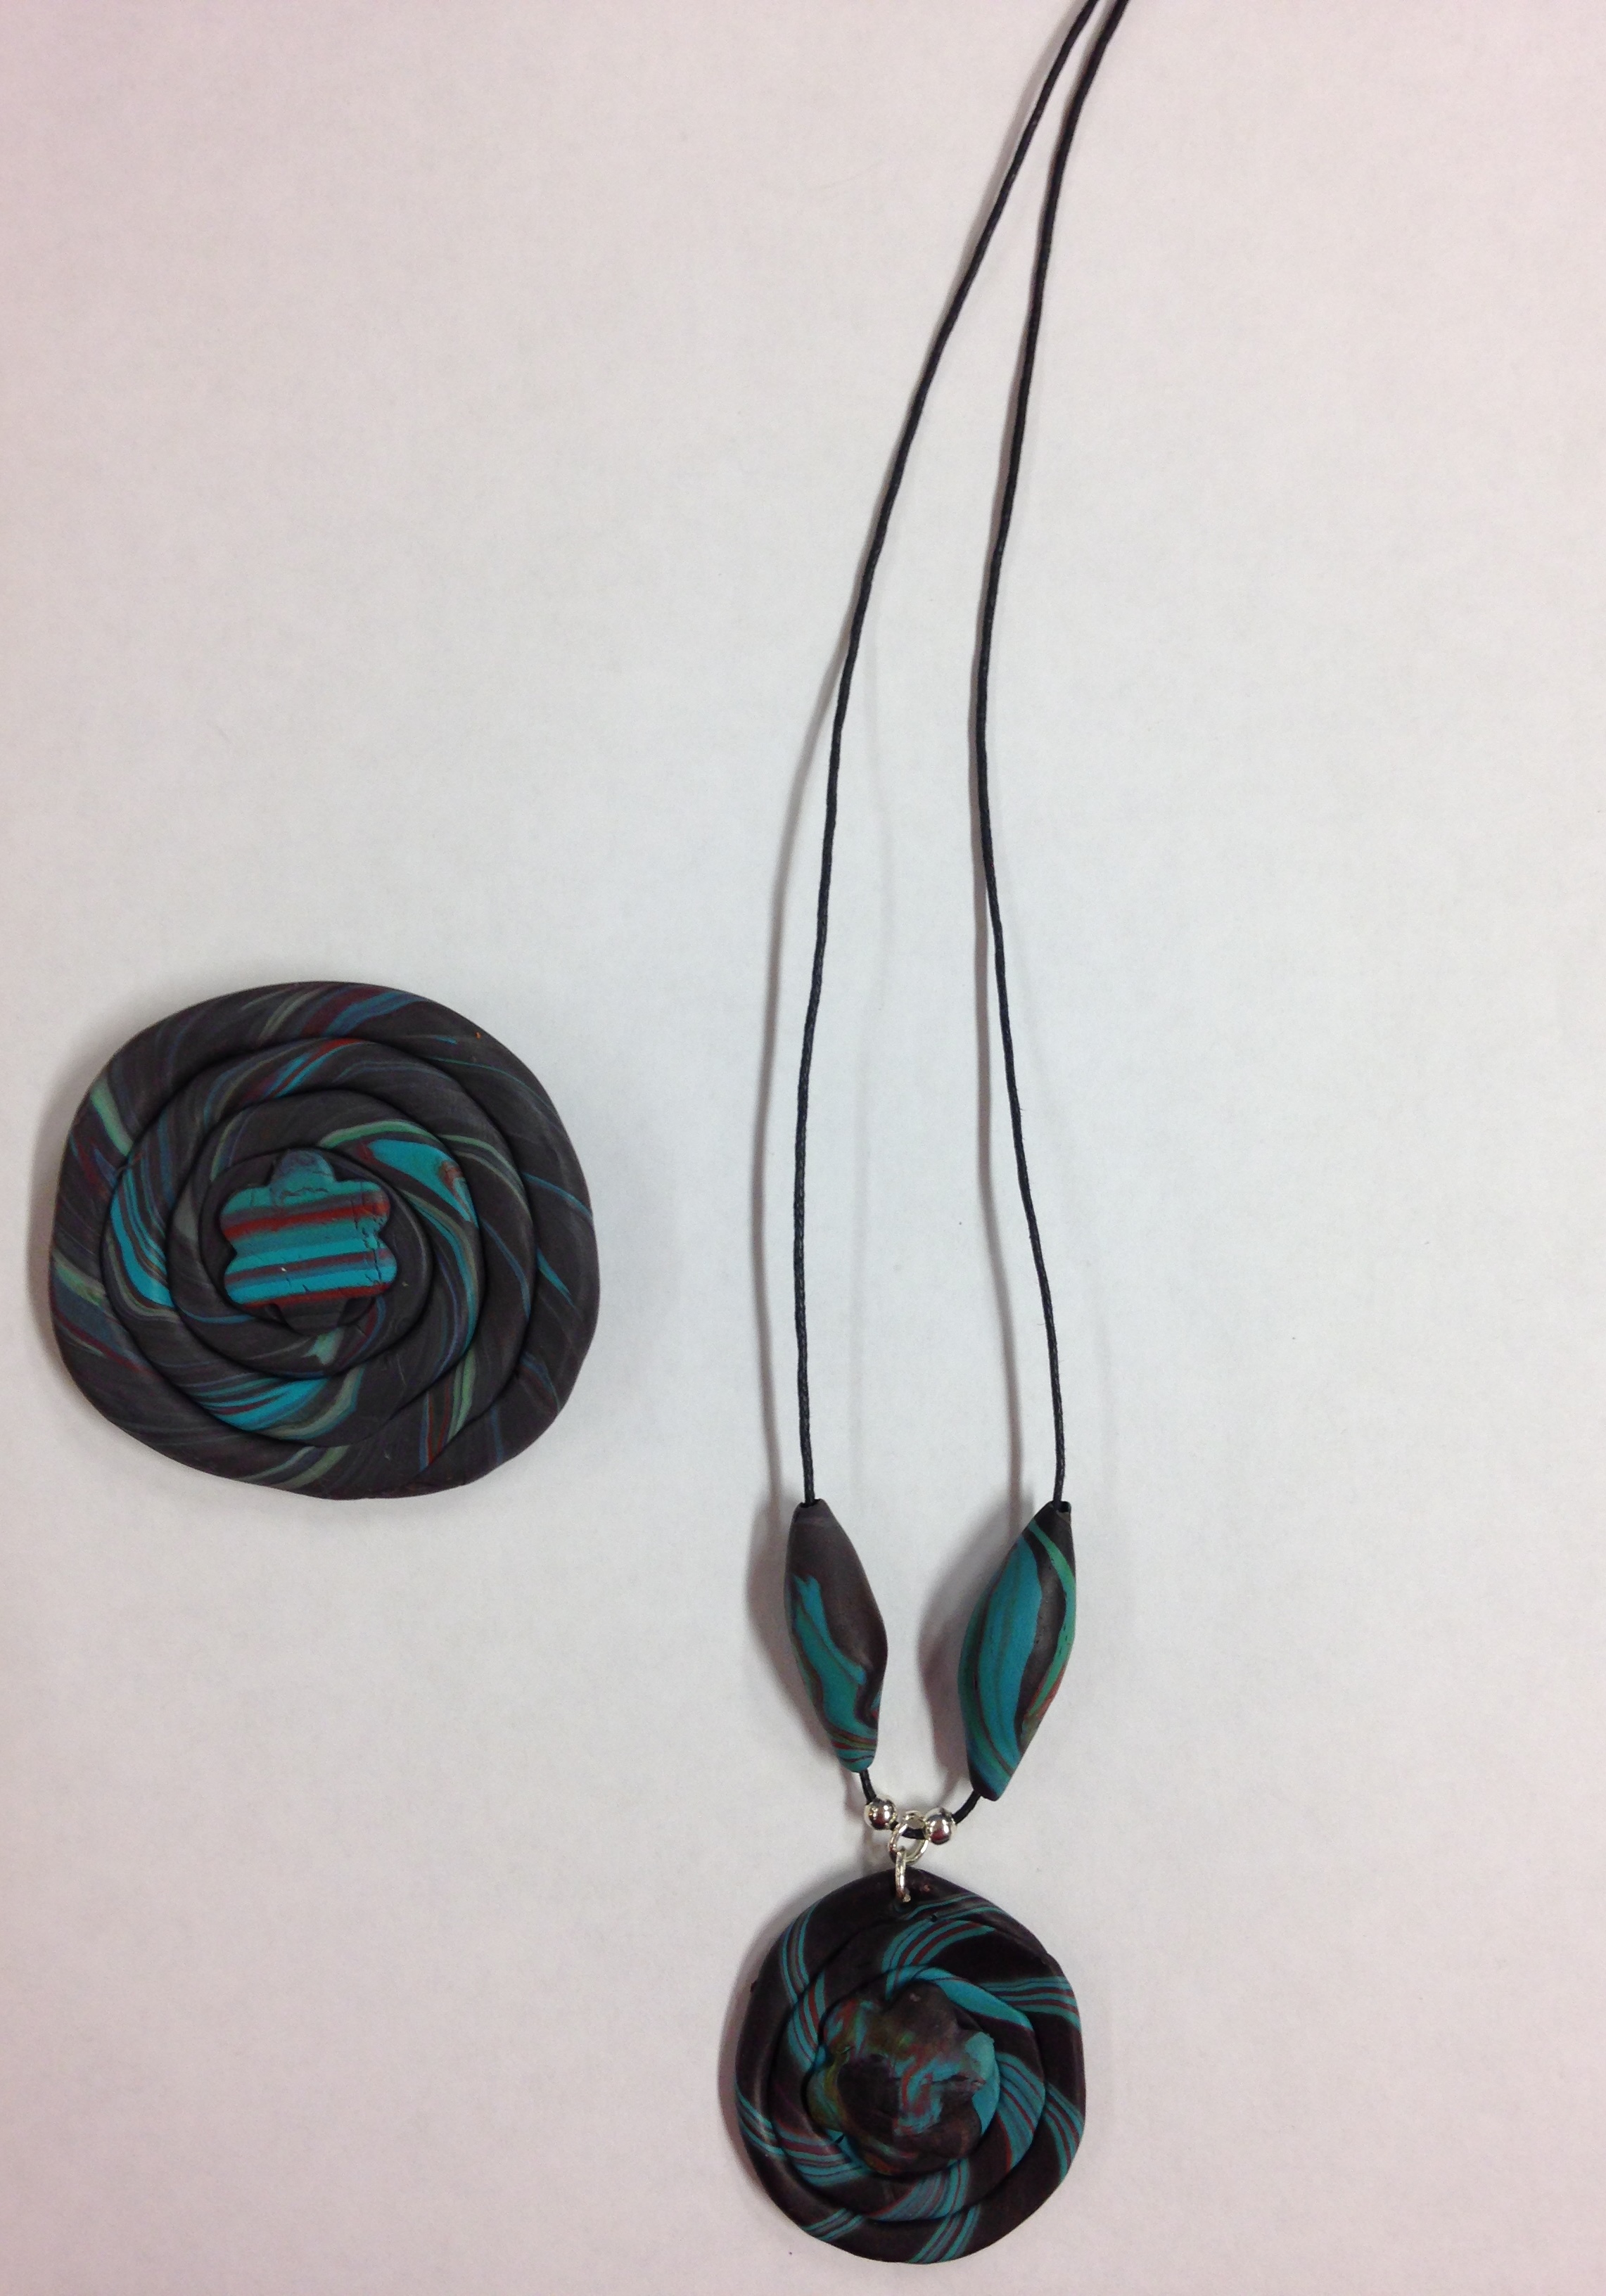 Brooch and necklace made from a mixture of black and blue